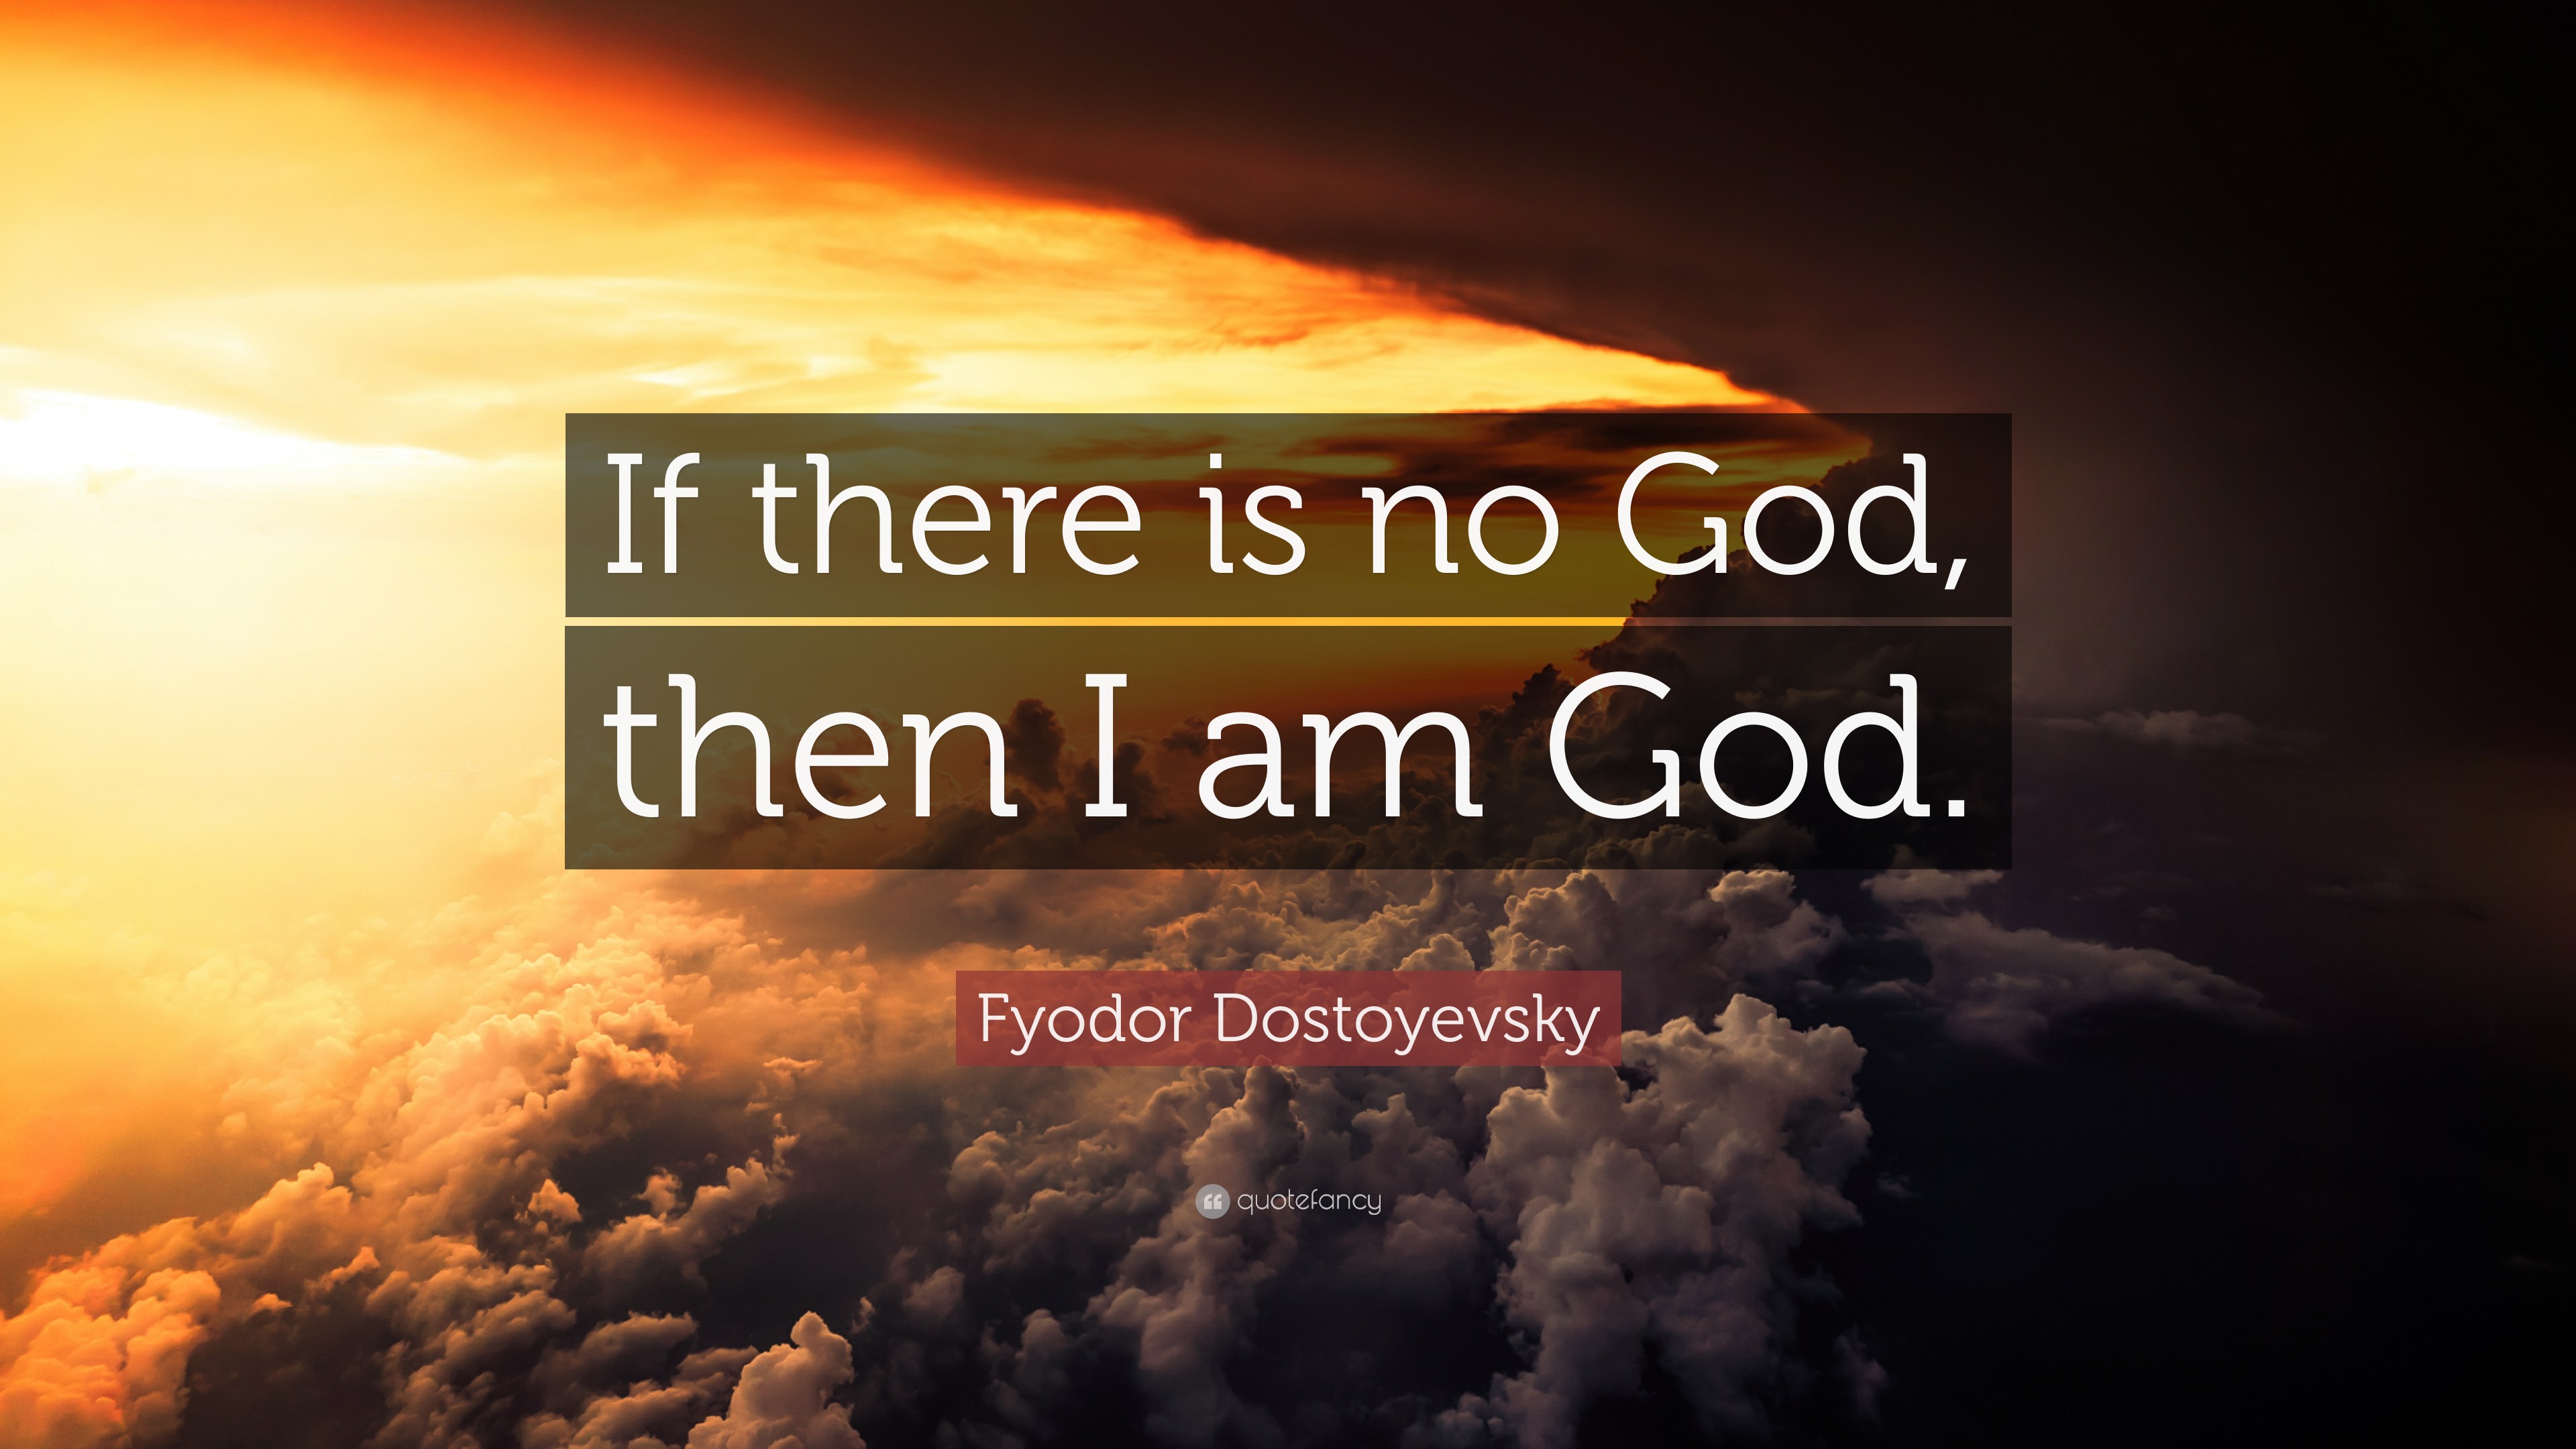 Fyodor Dostoyevsky Quote If There Is No God Then I Am God